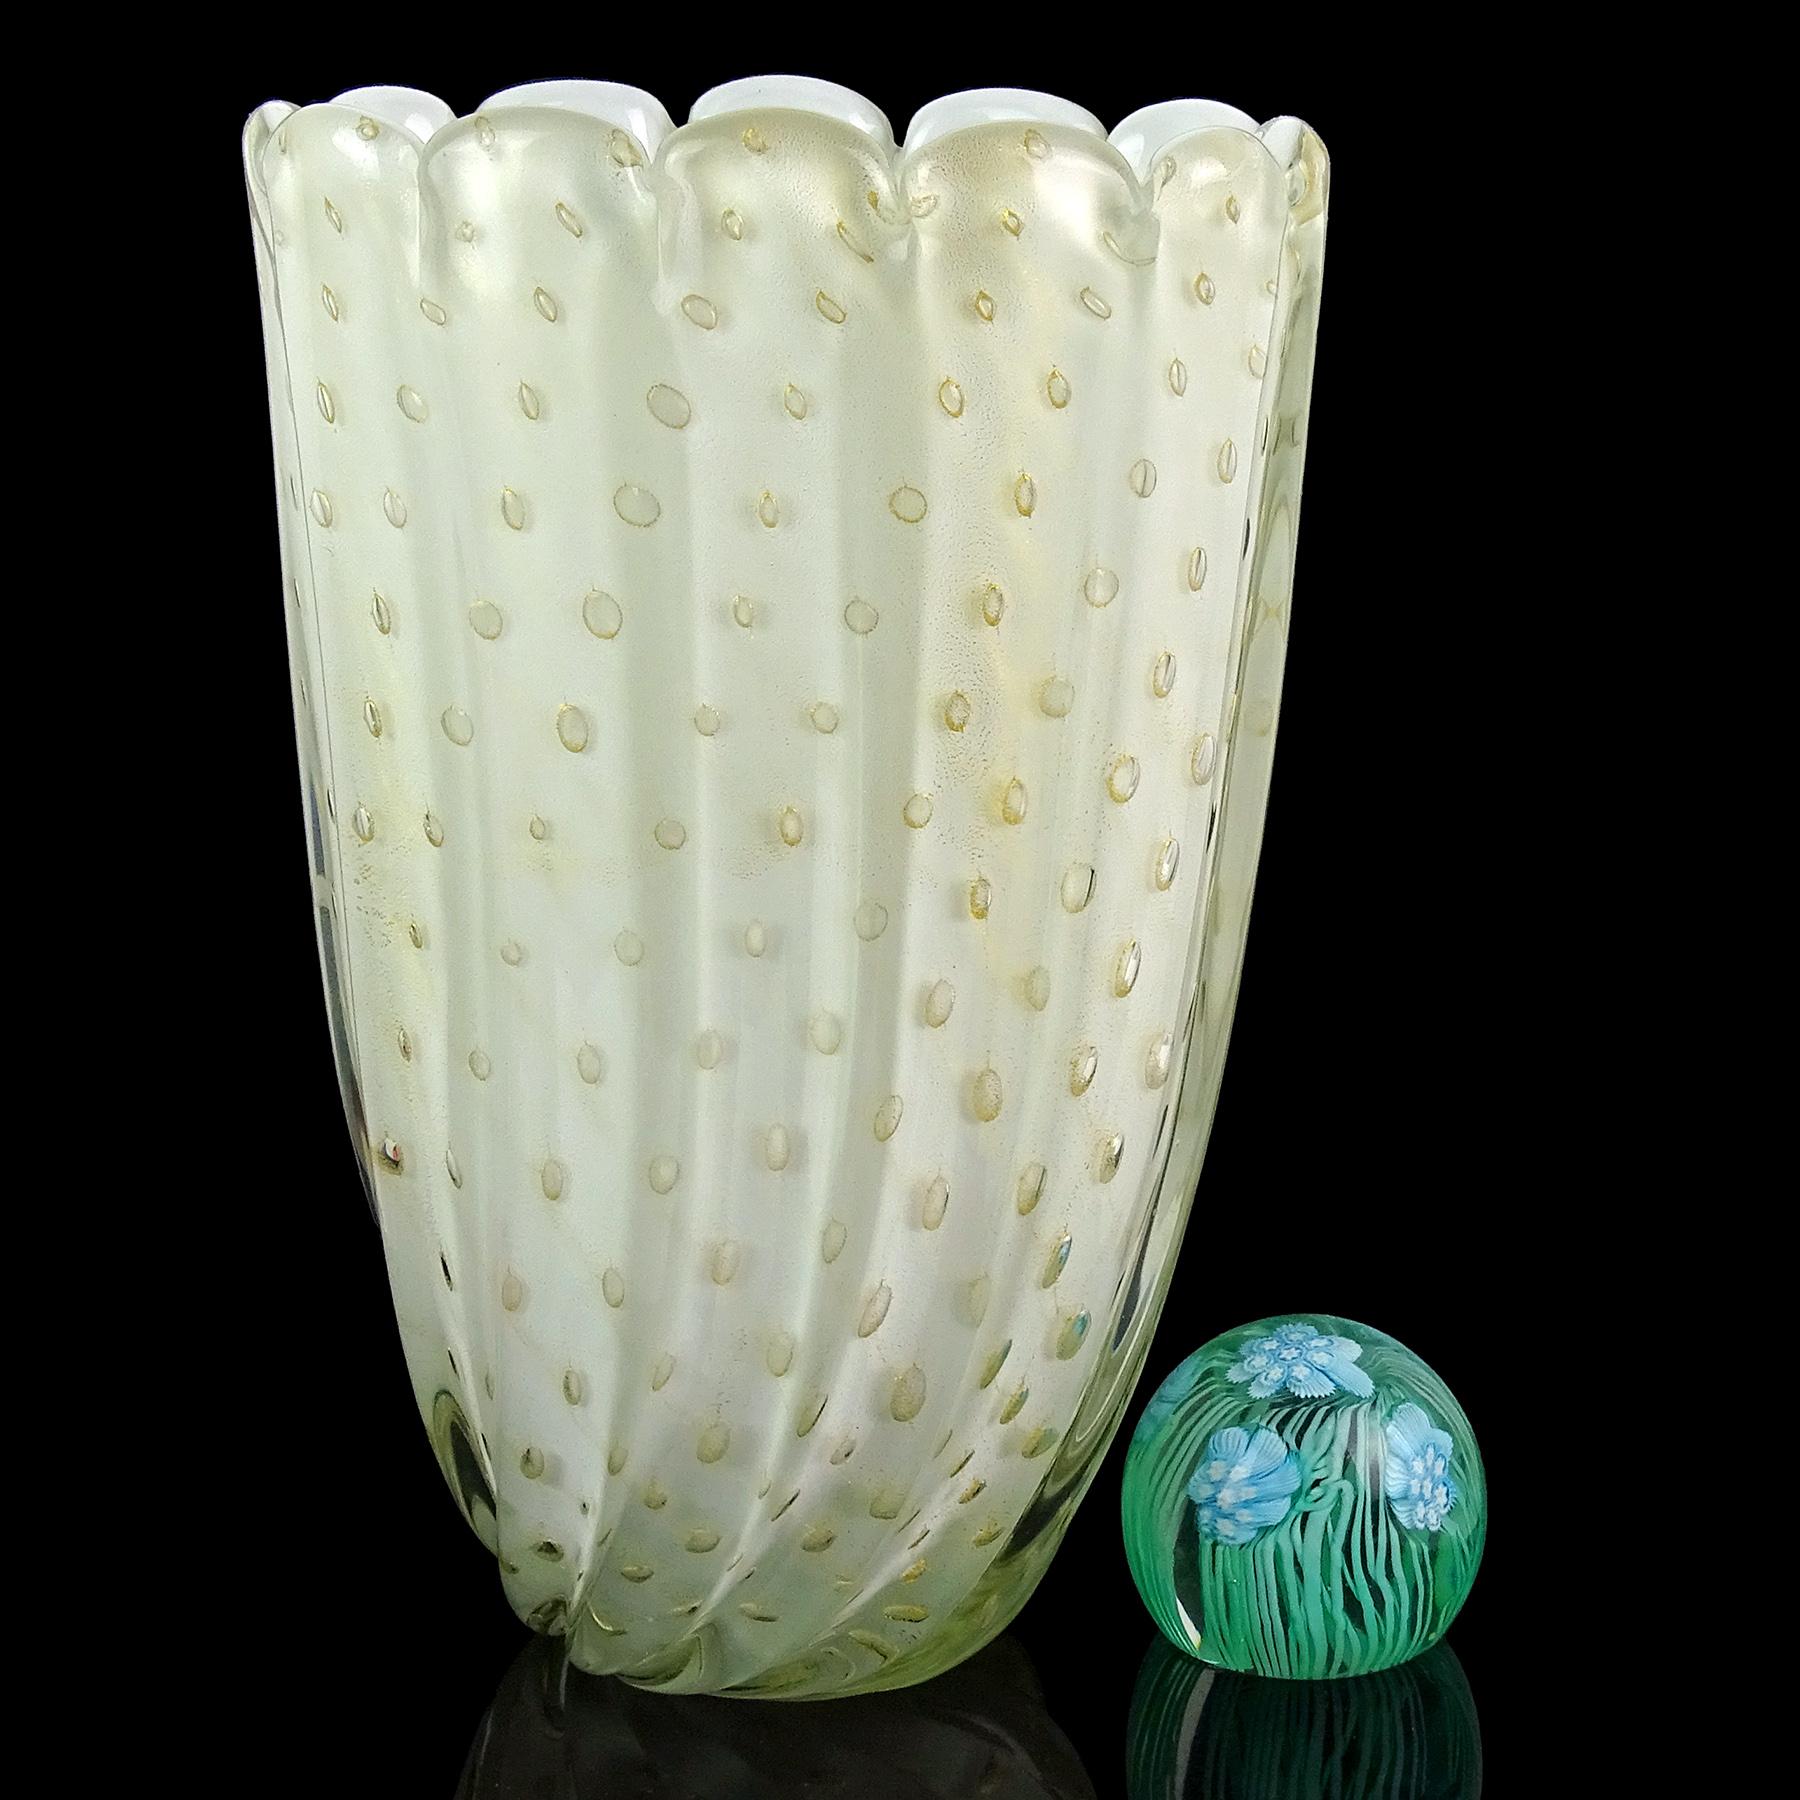 Beautiful and large, vintage Murano hand blown white, controlled bubbles and gold flecks Italian art glass swirling ribbed surface flower vase. Documented to designer Alfredo Barbini, circa 1950s (published in his catalogue). It has a scalloped oval